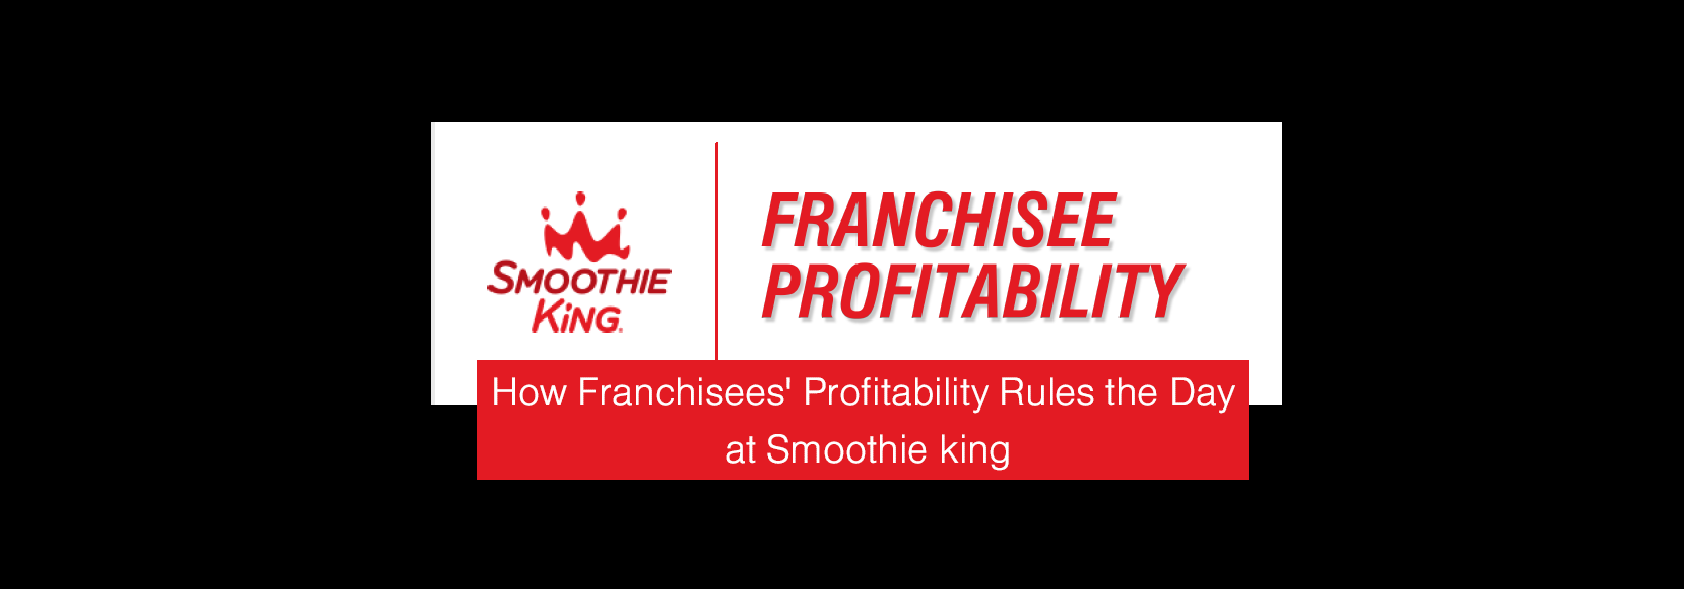 Franchisees' Profitability and Smoothie King